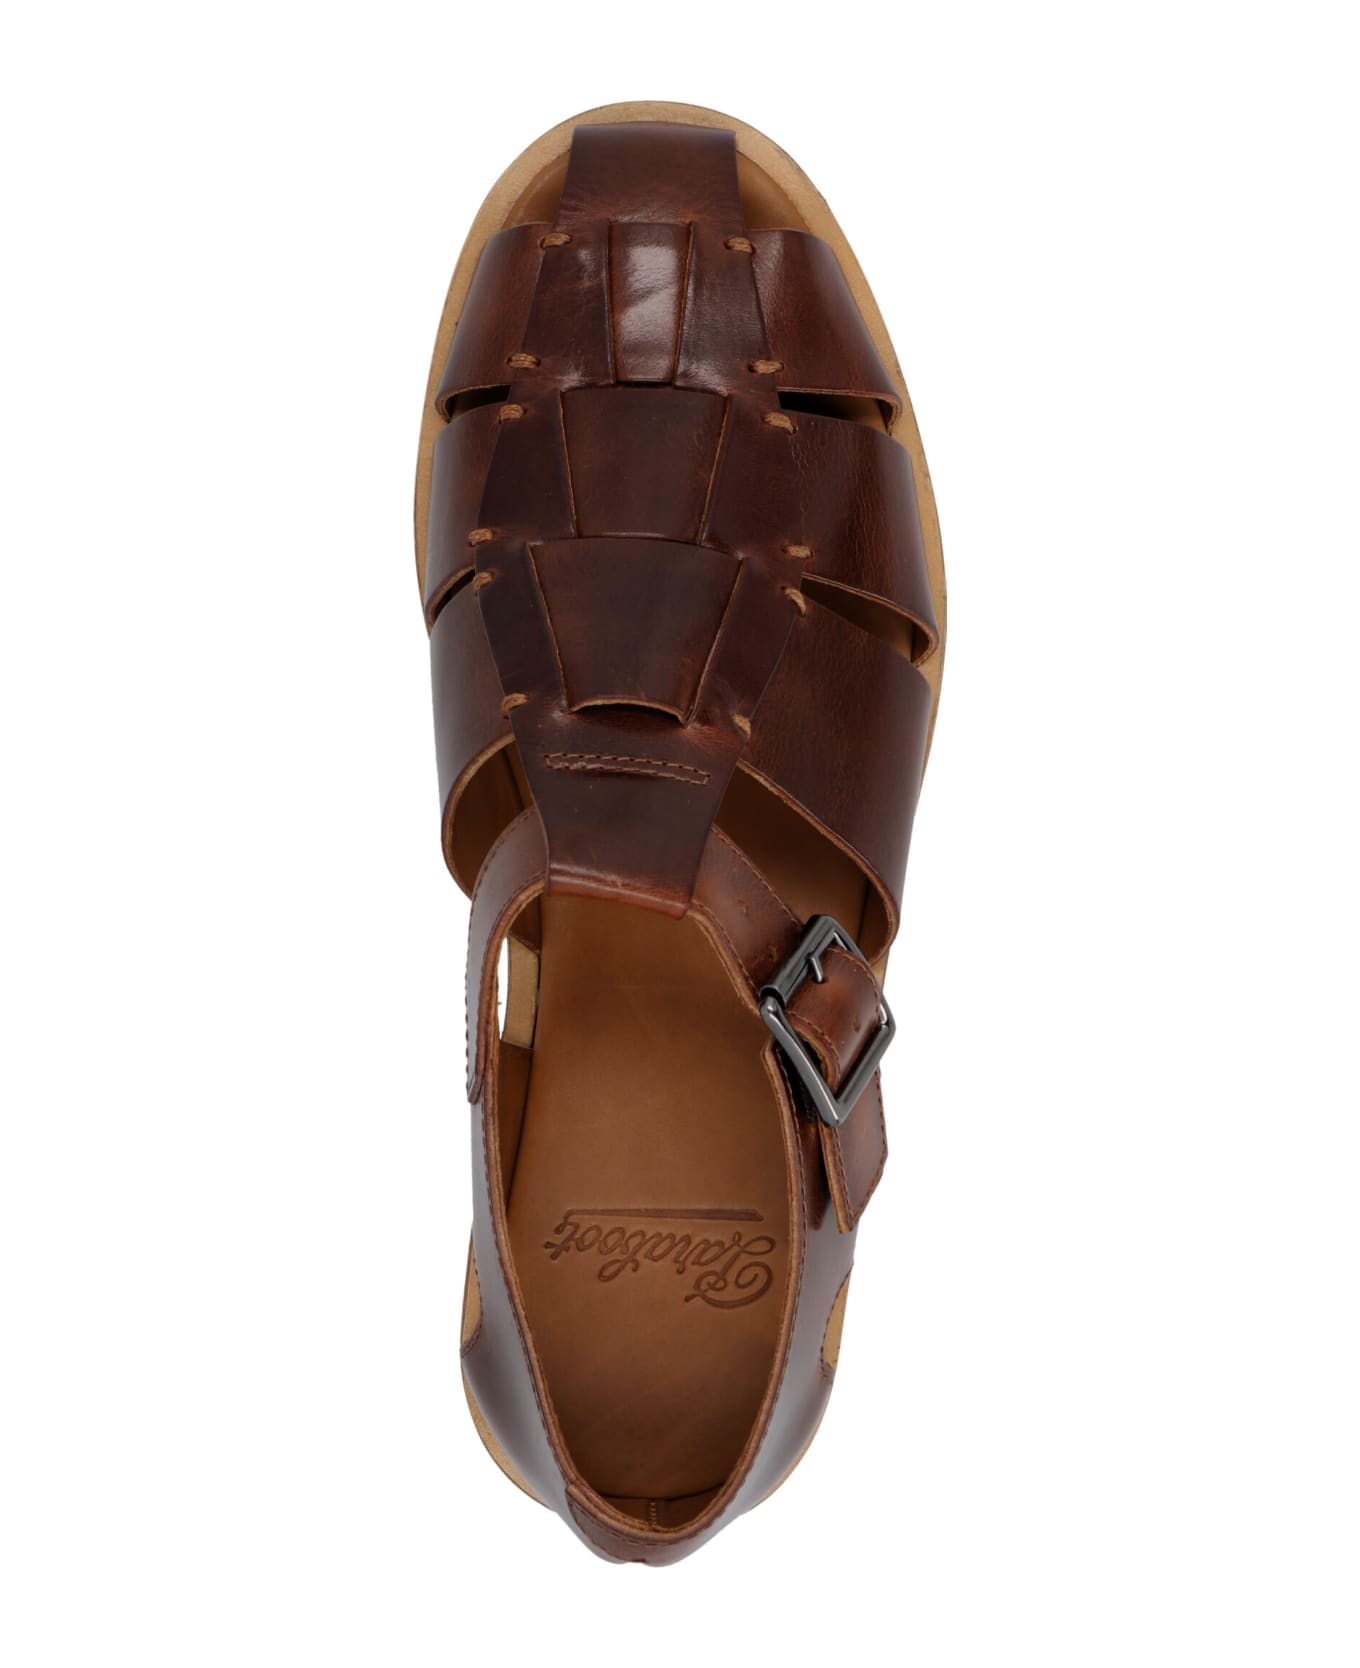 Paraboot 'pacific' Sandals - Brown その他各種シューズ